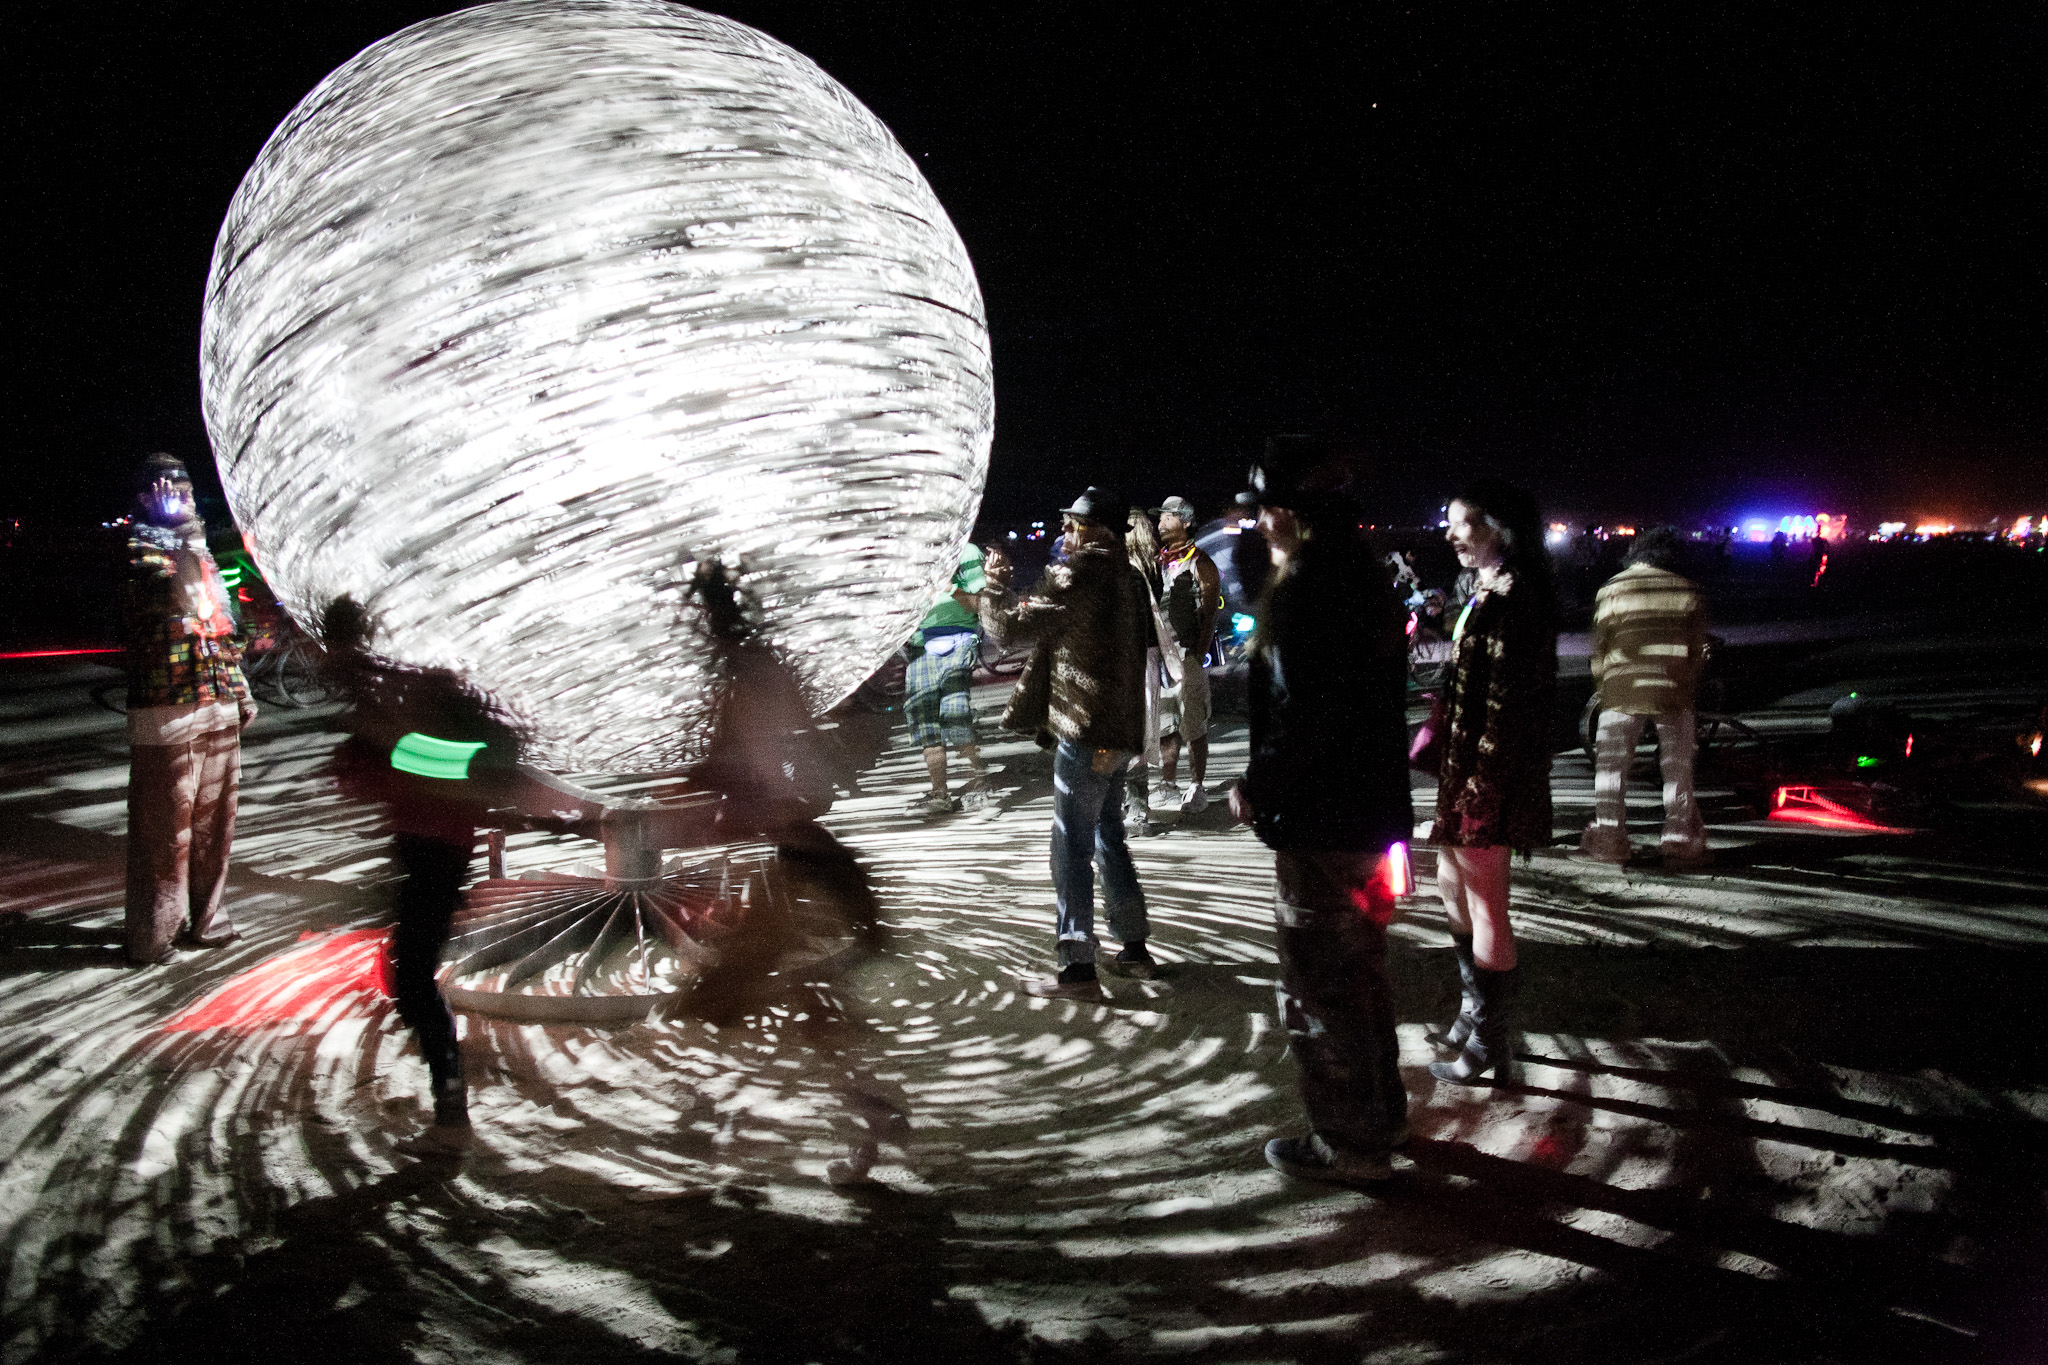 How to Prepare to Photograph Burning Man–From a Veteran Attending for Years